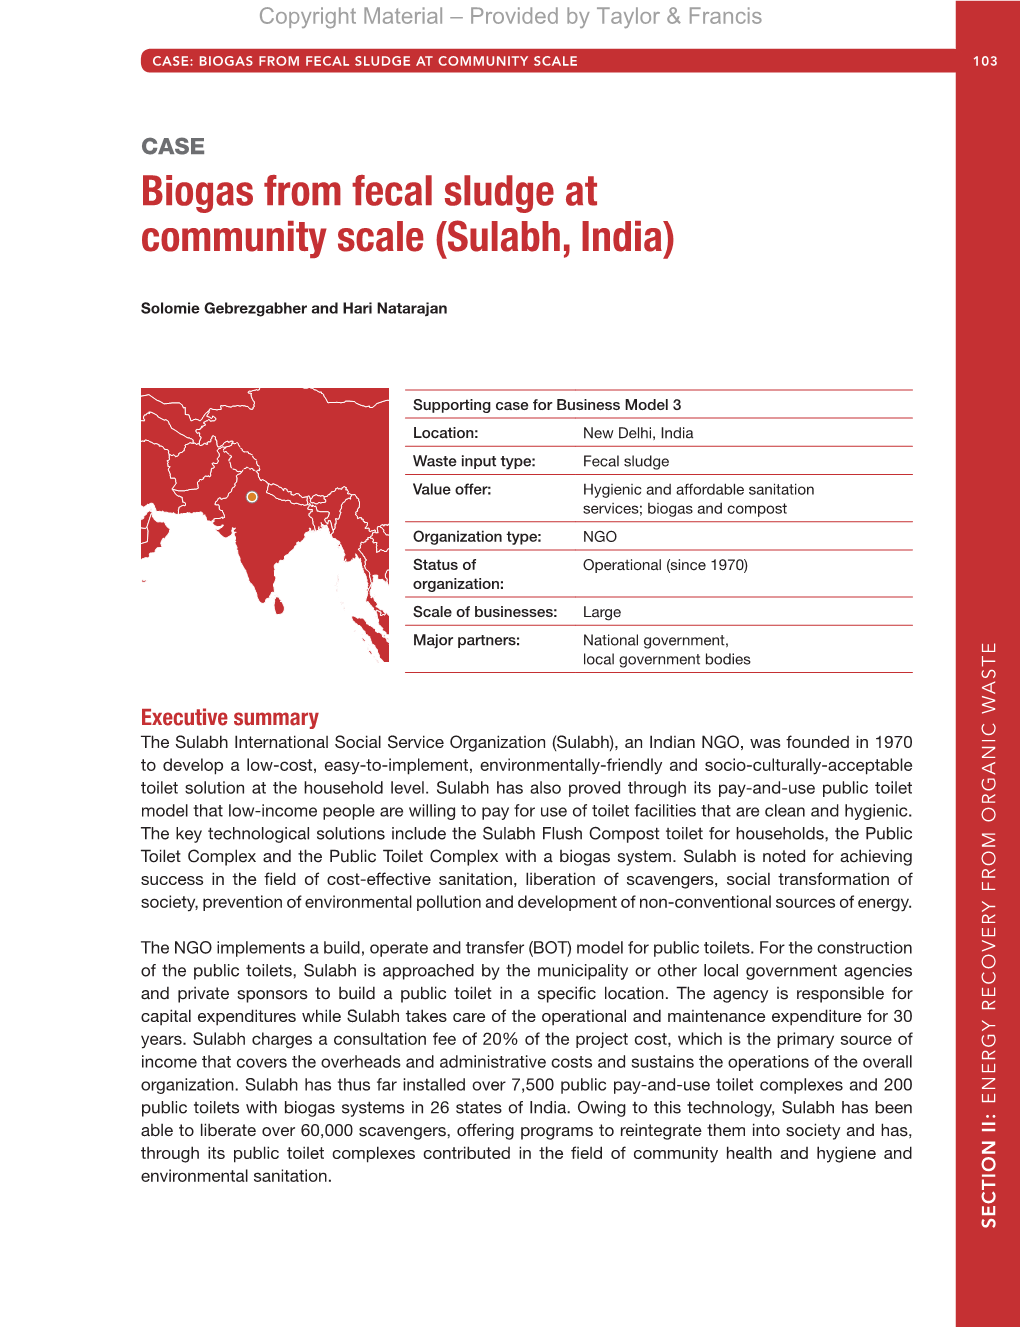 Biogas from Fecal Sludge at Community Scale (Sulabh, India)